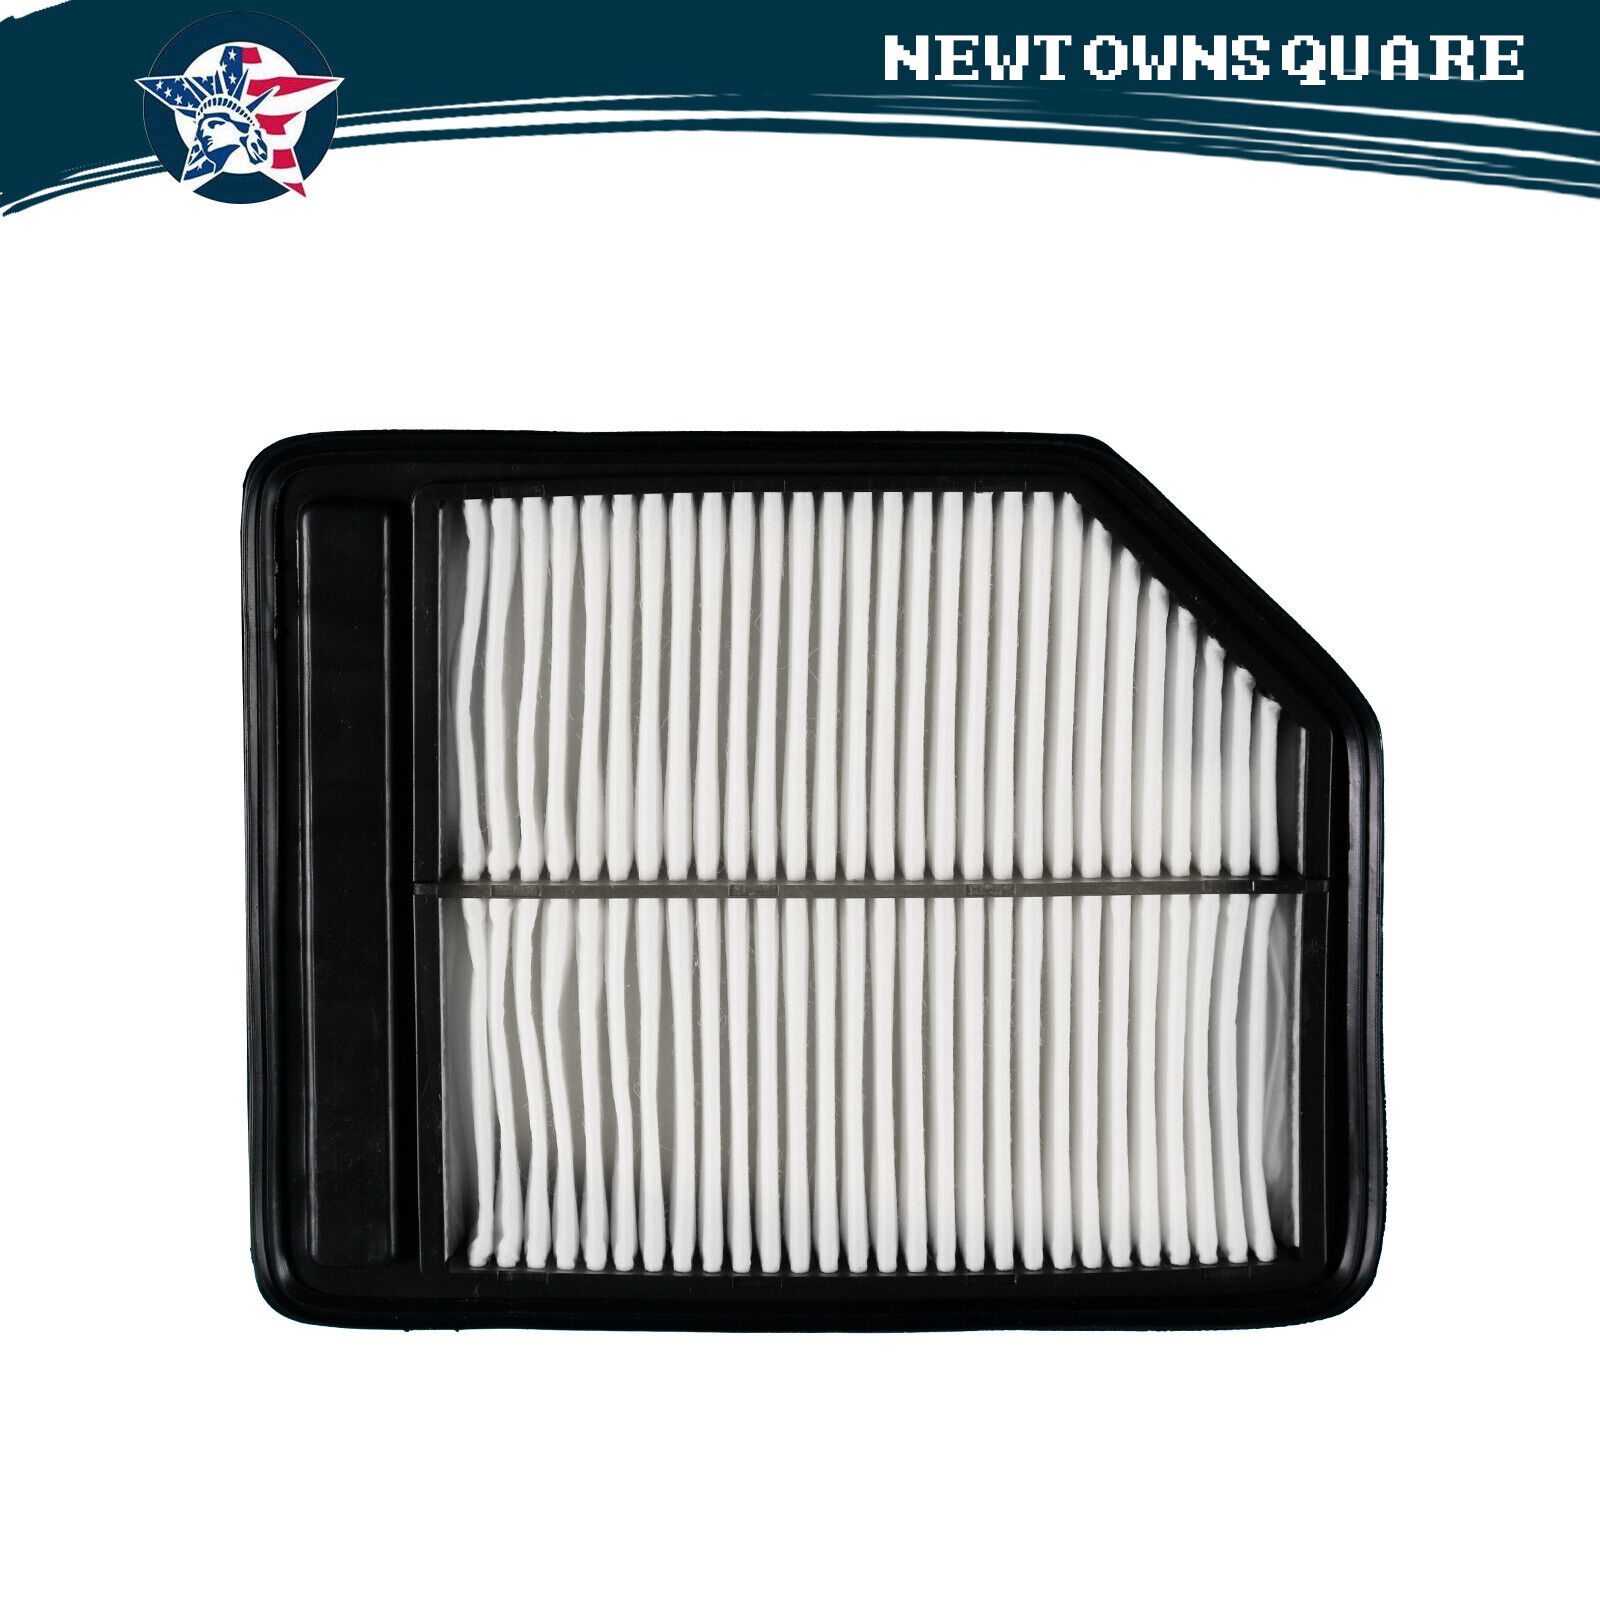 ENGINE AIR FILTER FOR 2006 2007 2008 2009 2010 2011 13-15 HONDA CIVIC 1.8L CNG